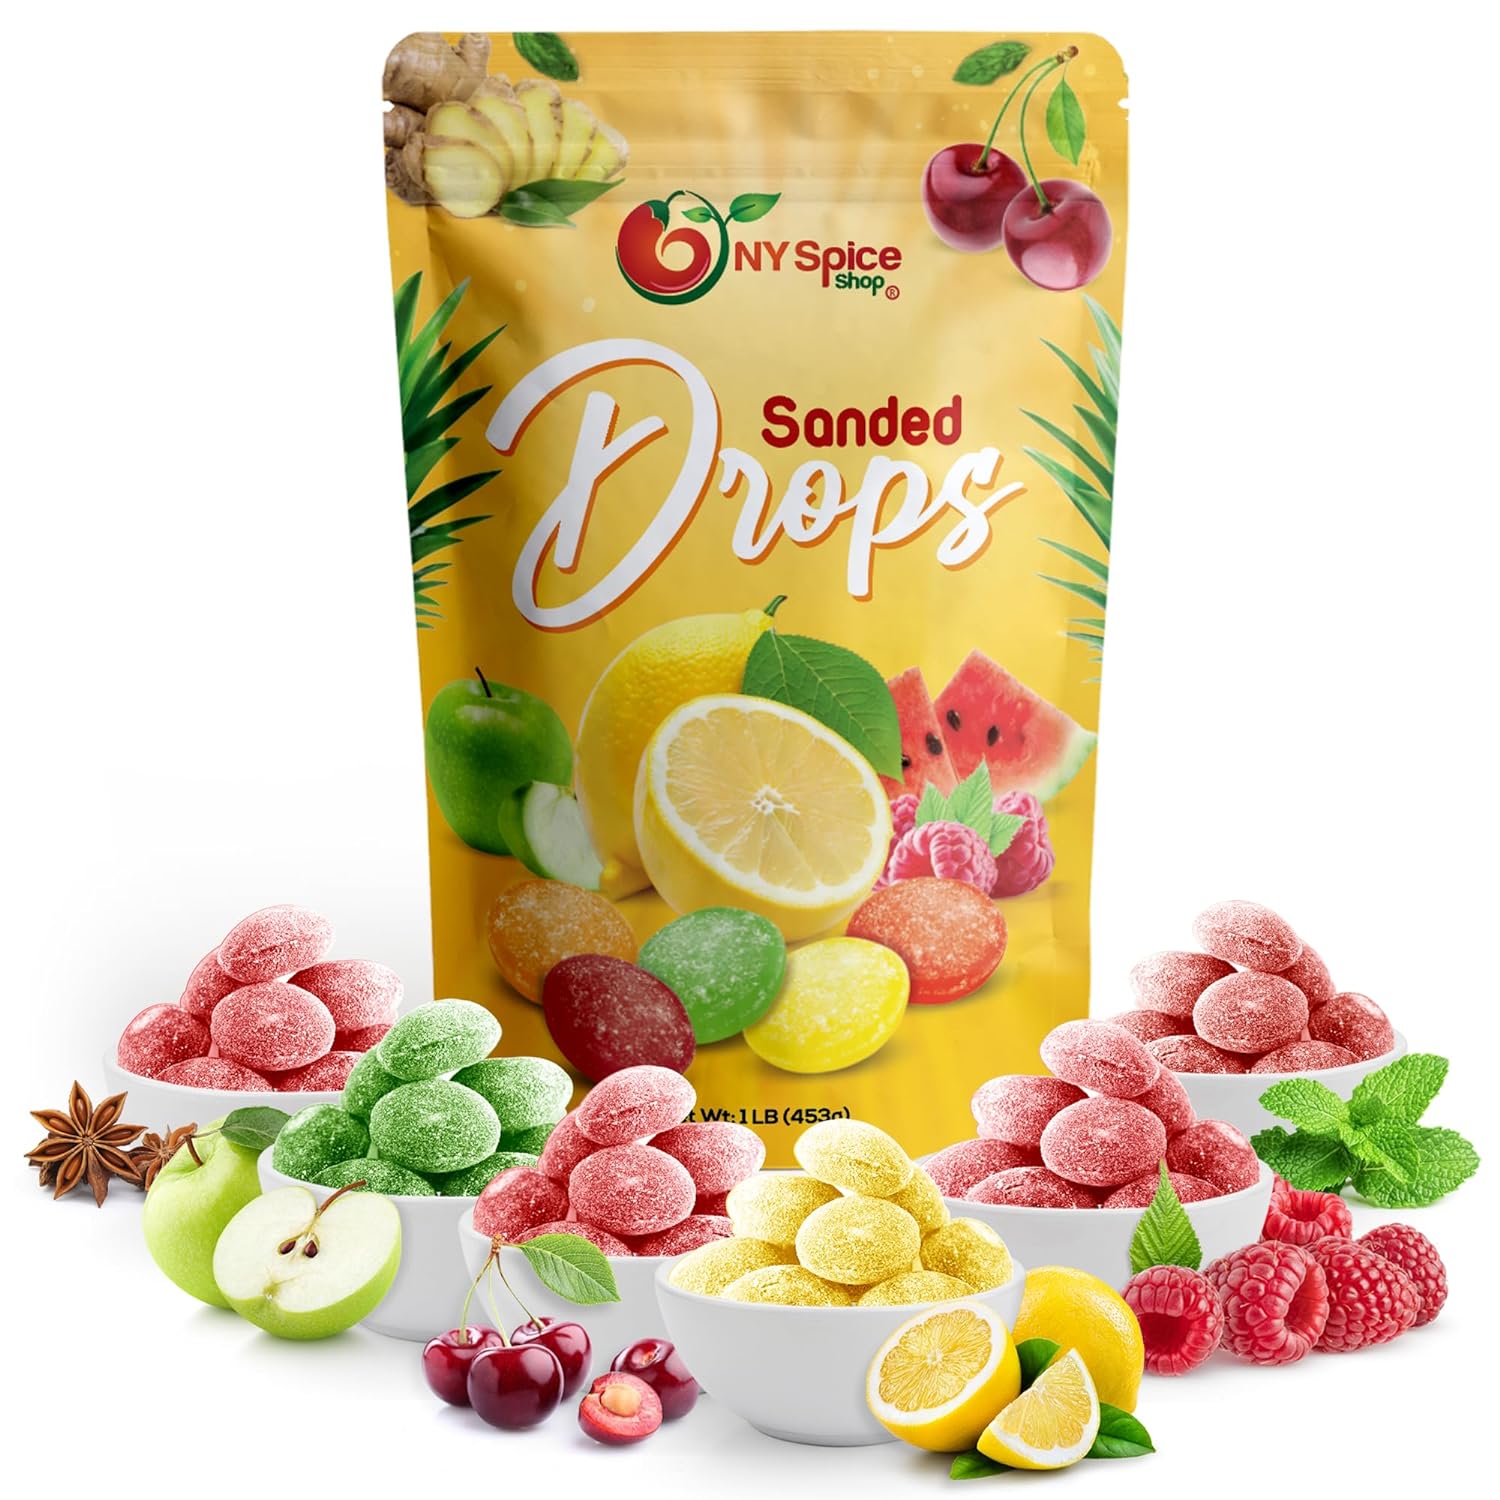 Assorted Sanded Fruit Drops - NY Spice Shop